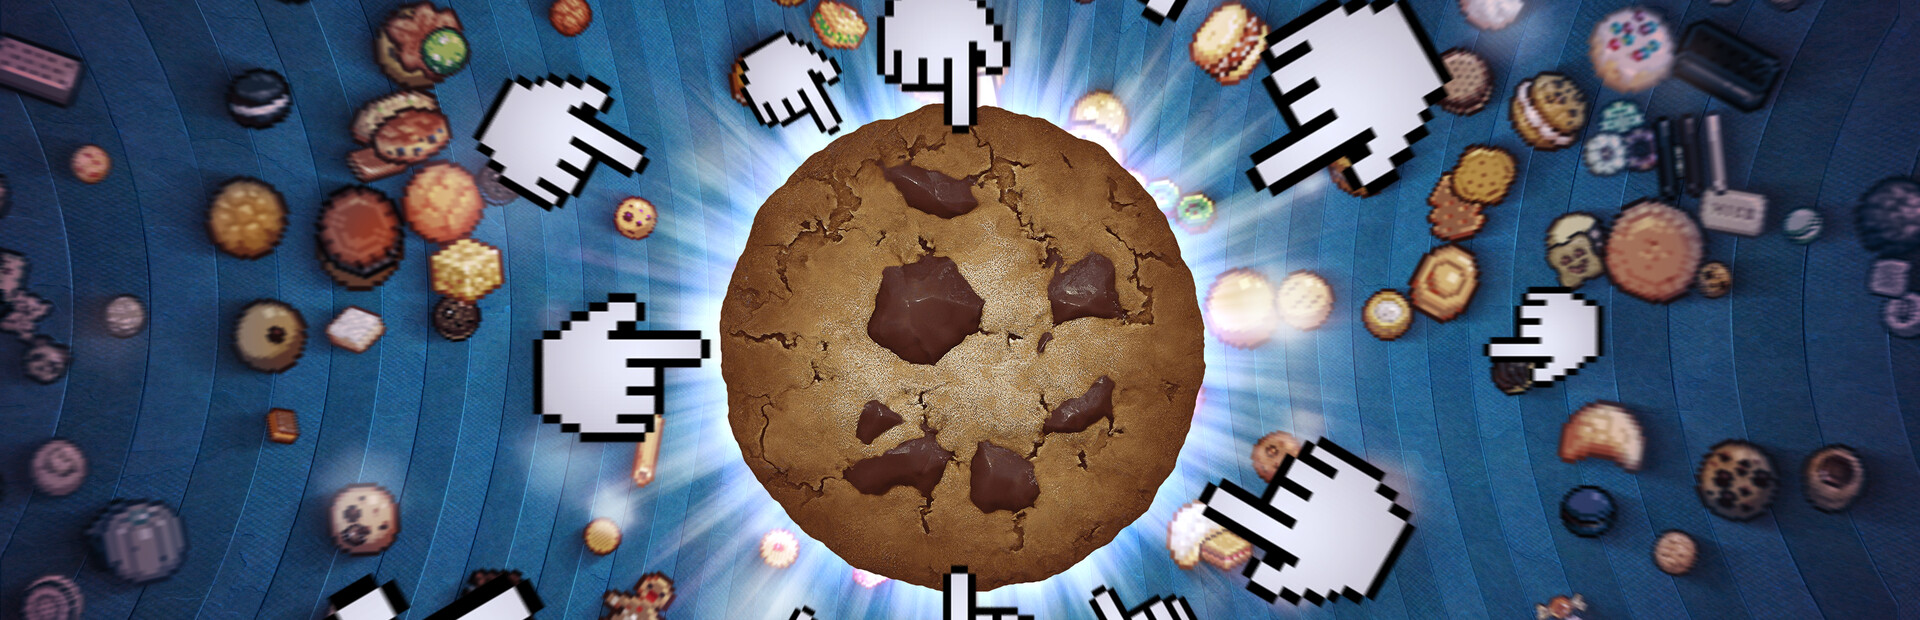 Cookie Clicker cover image